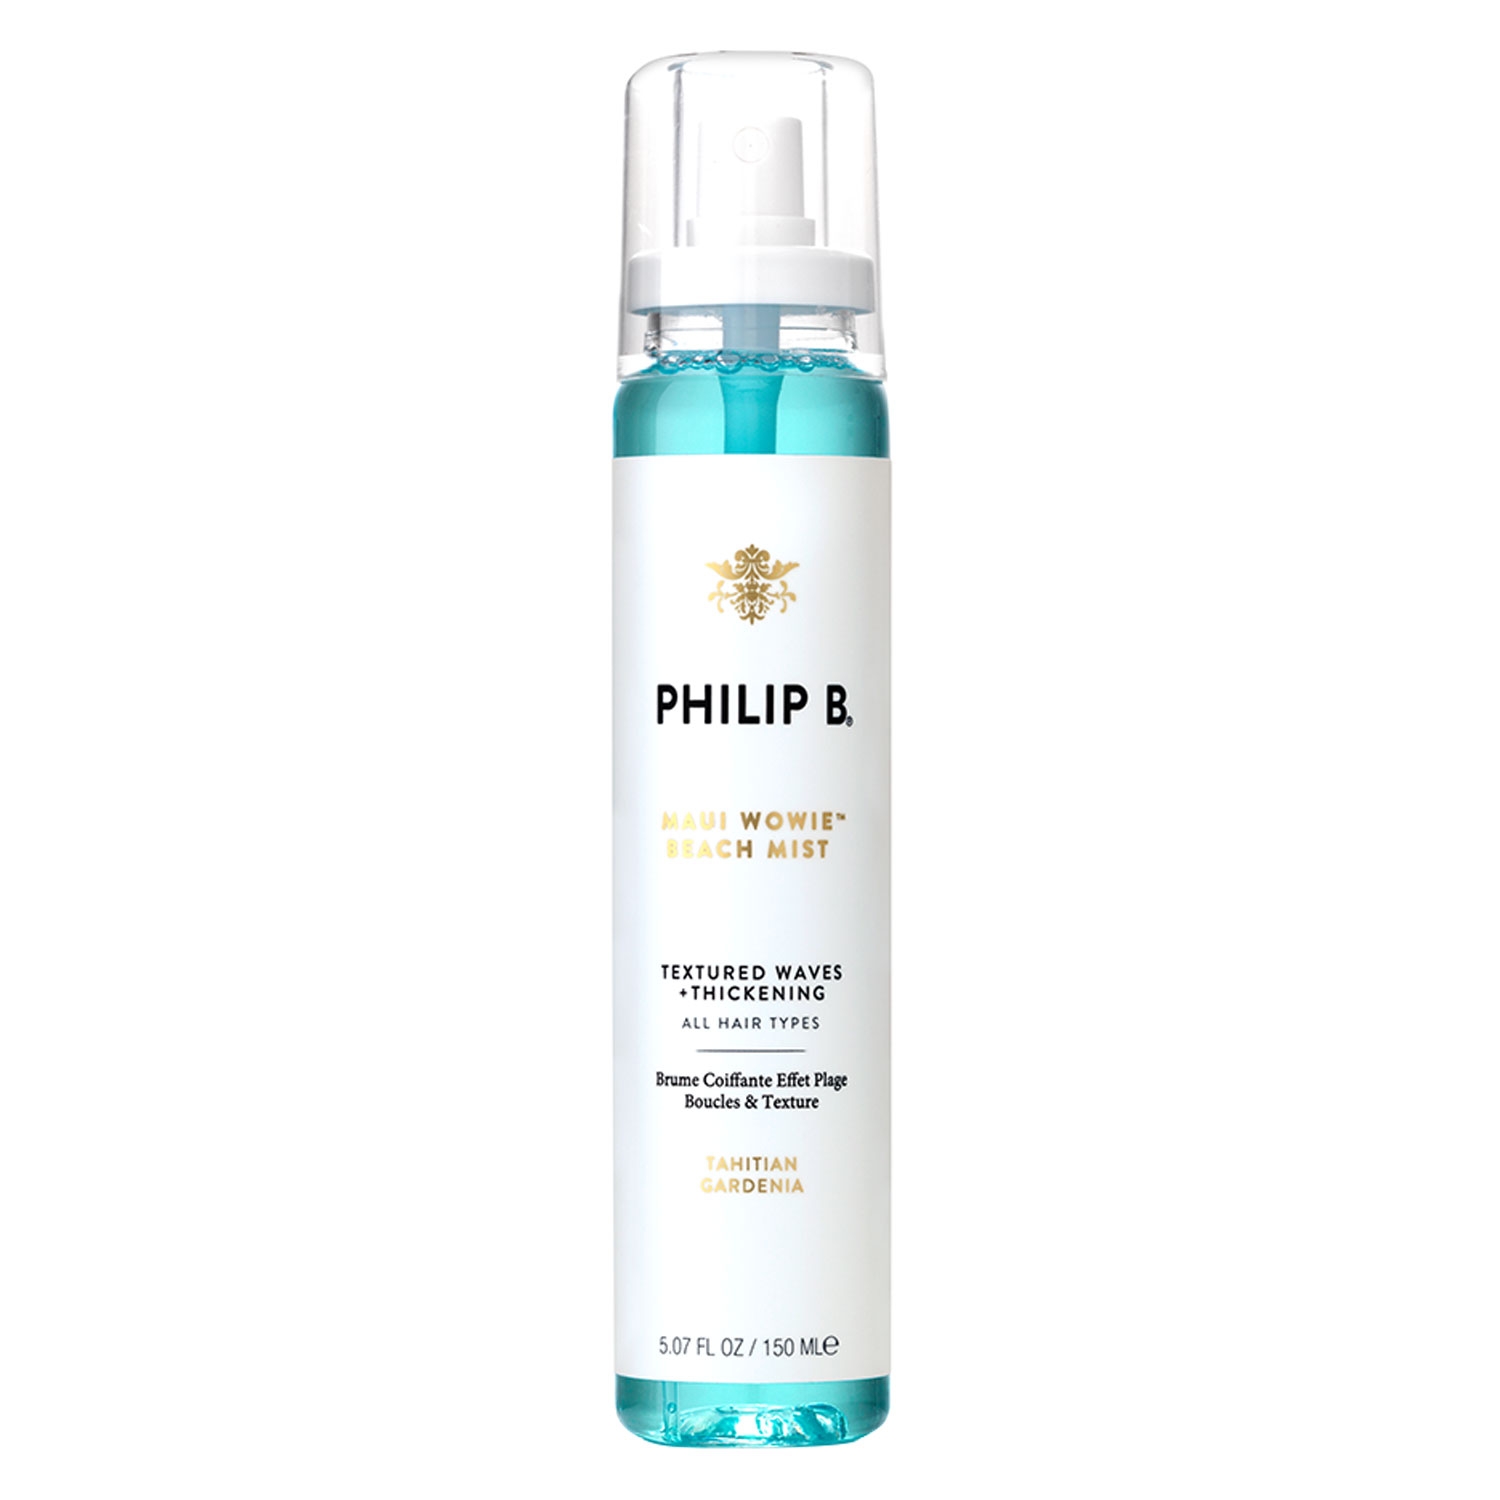 Product image from Philip B - Maui Wowie Beach Mist